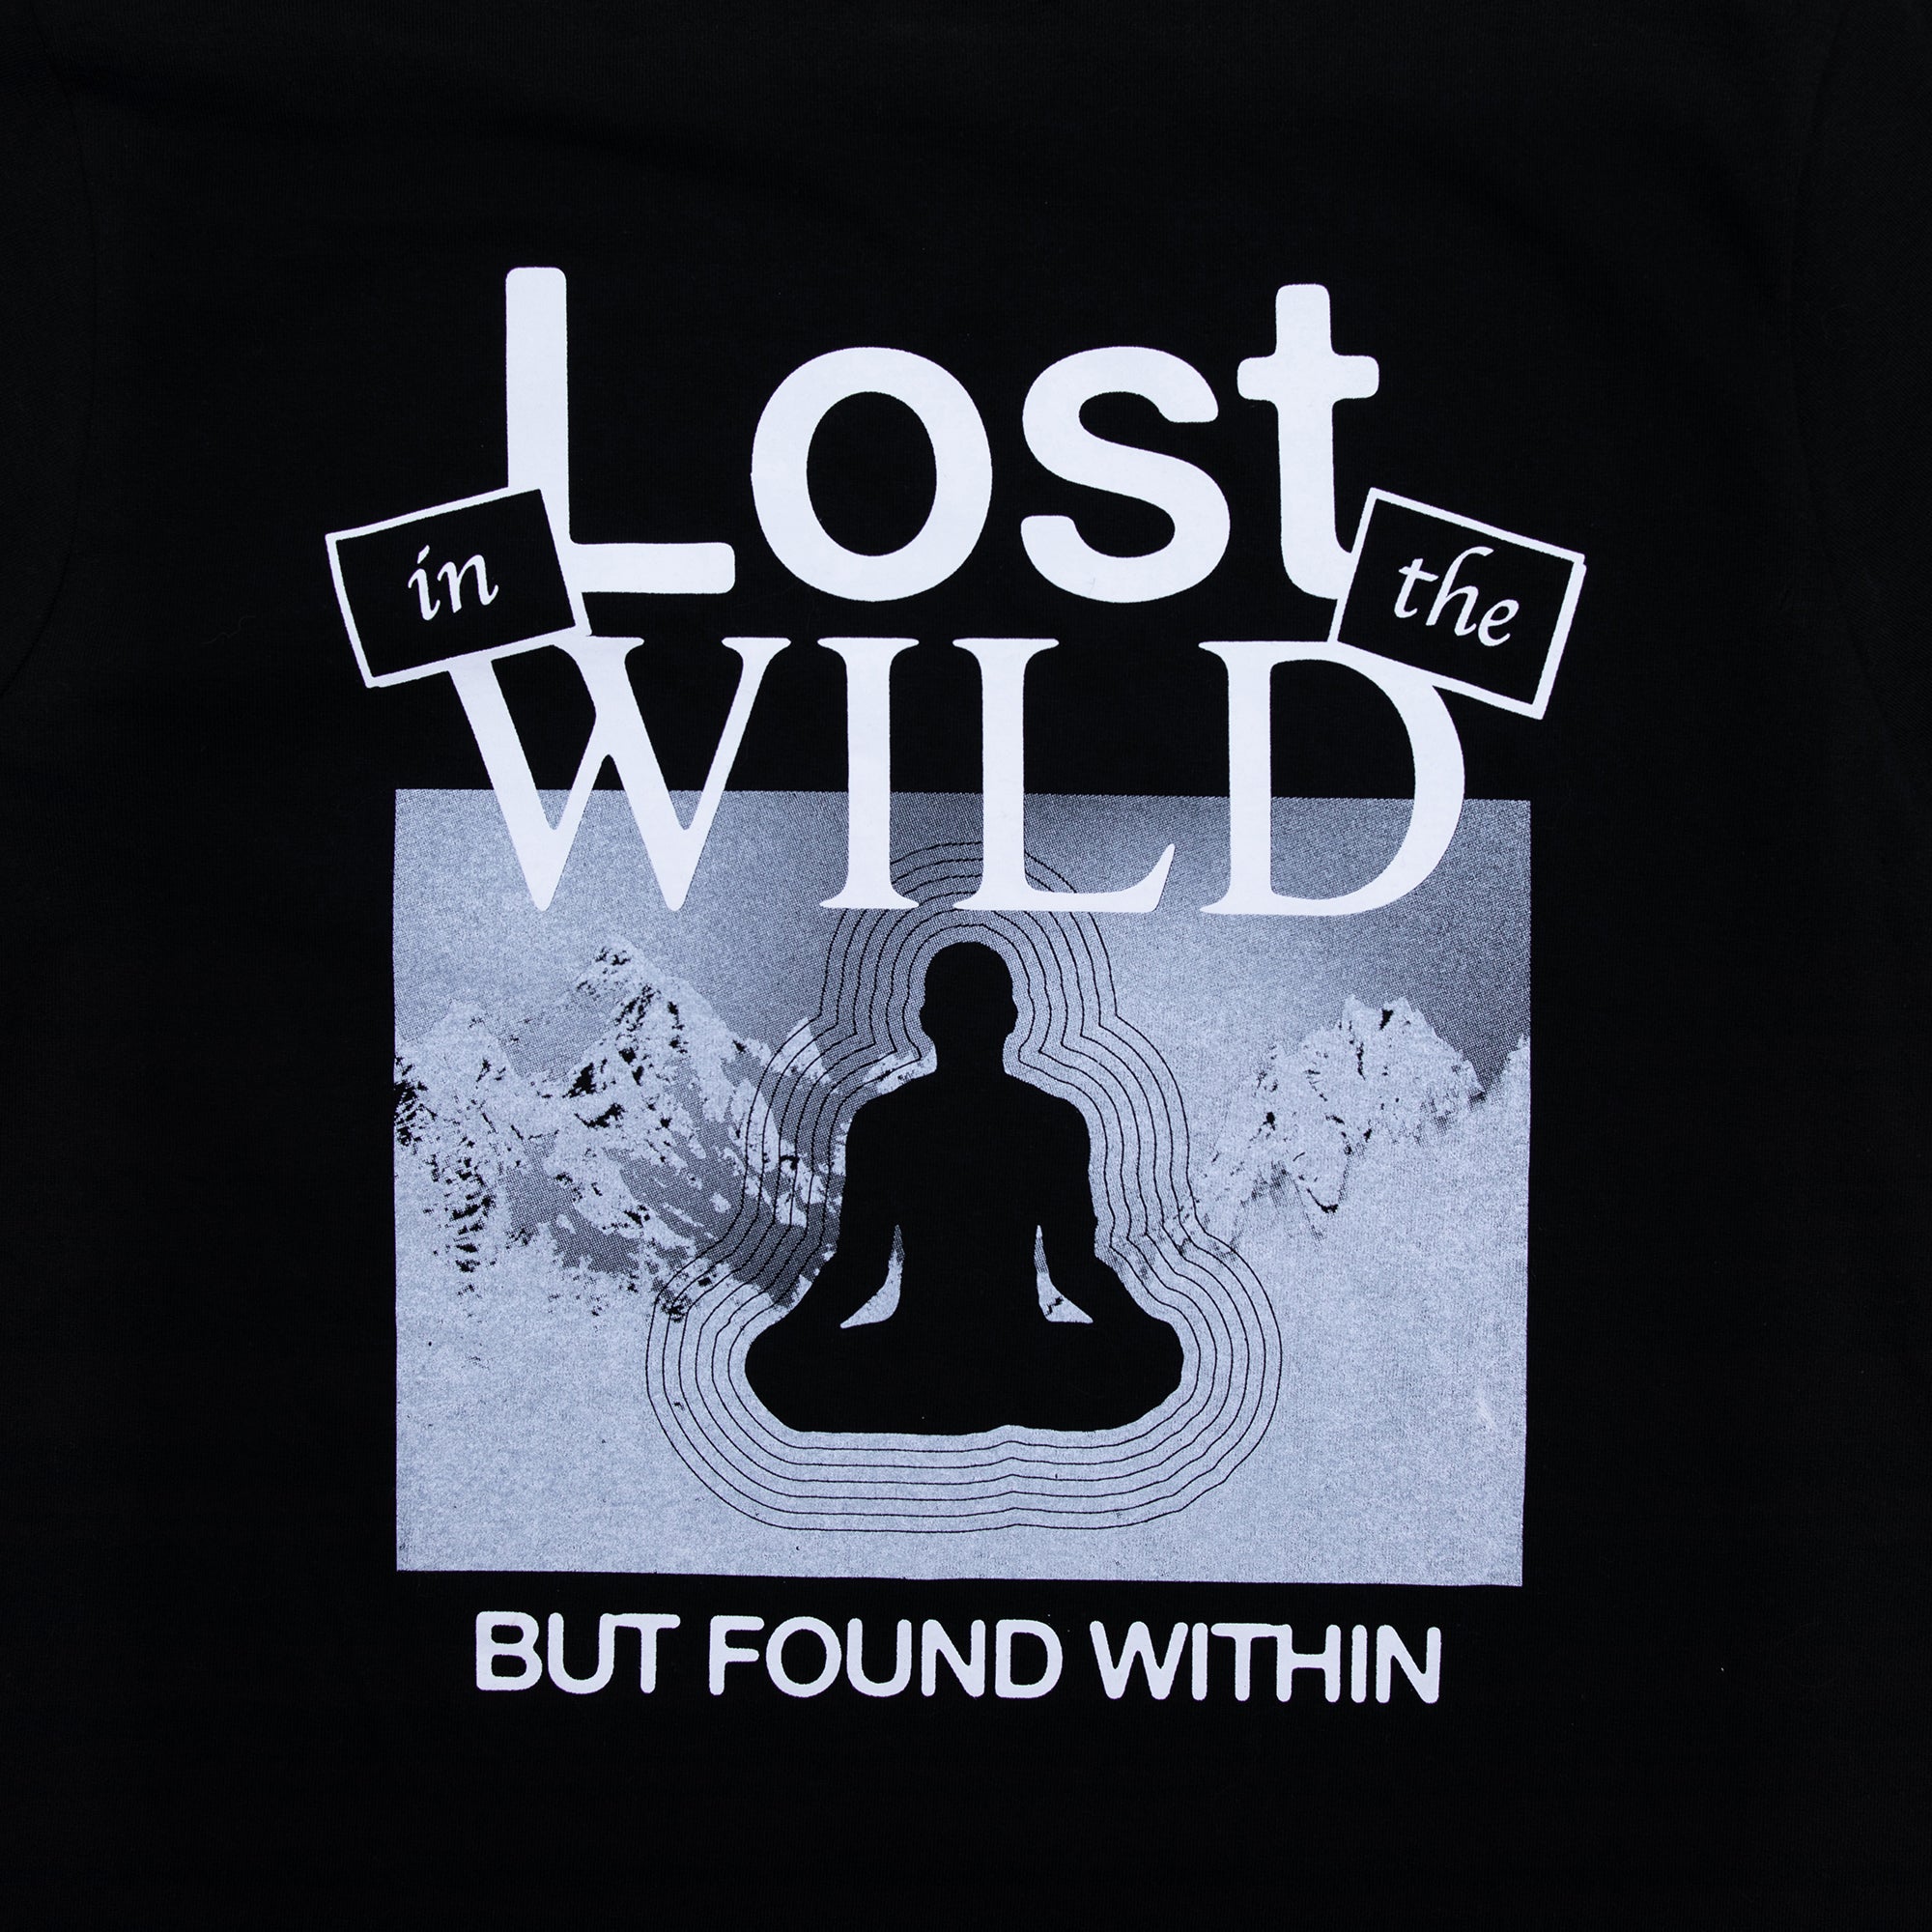 Lost and Found Tee